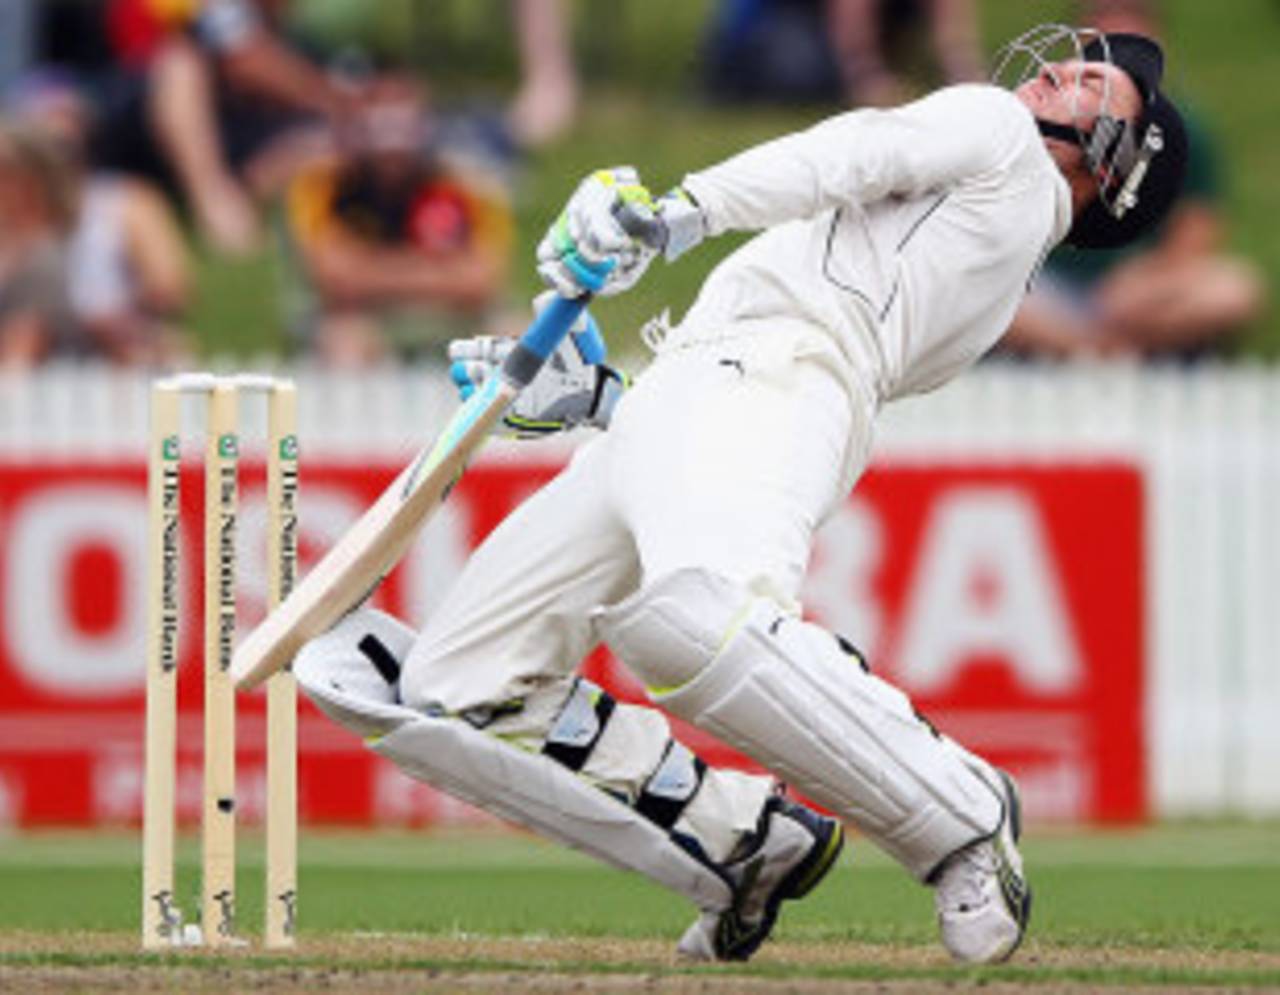 The batsman's skills at evading and playing bouncers must also be tested&nbsp;&nbsp;&bull;&nbsp;&nbsp;Getty Images